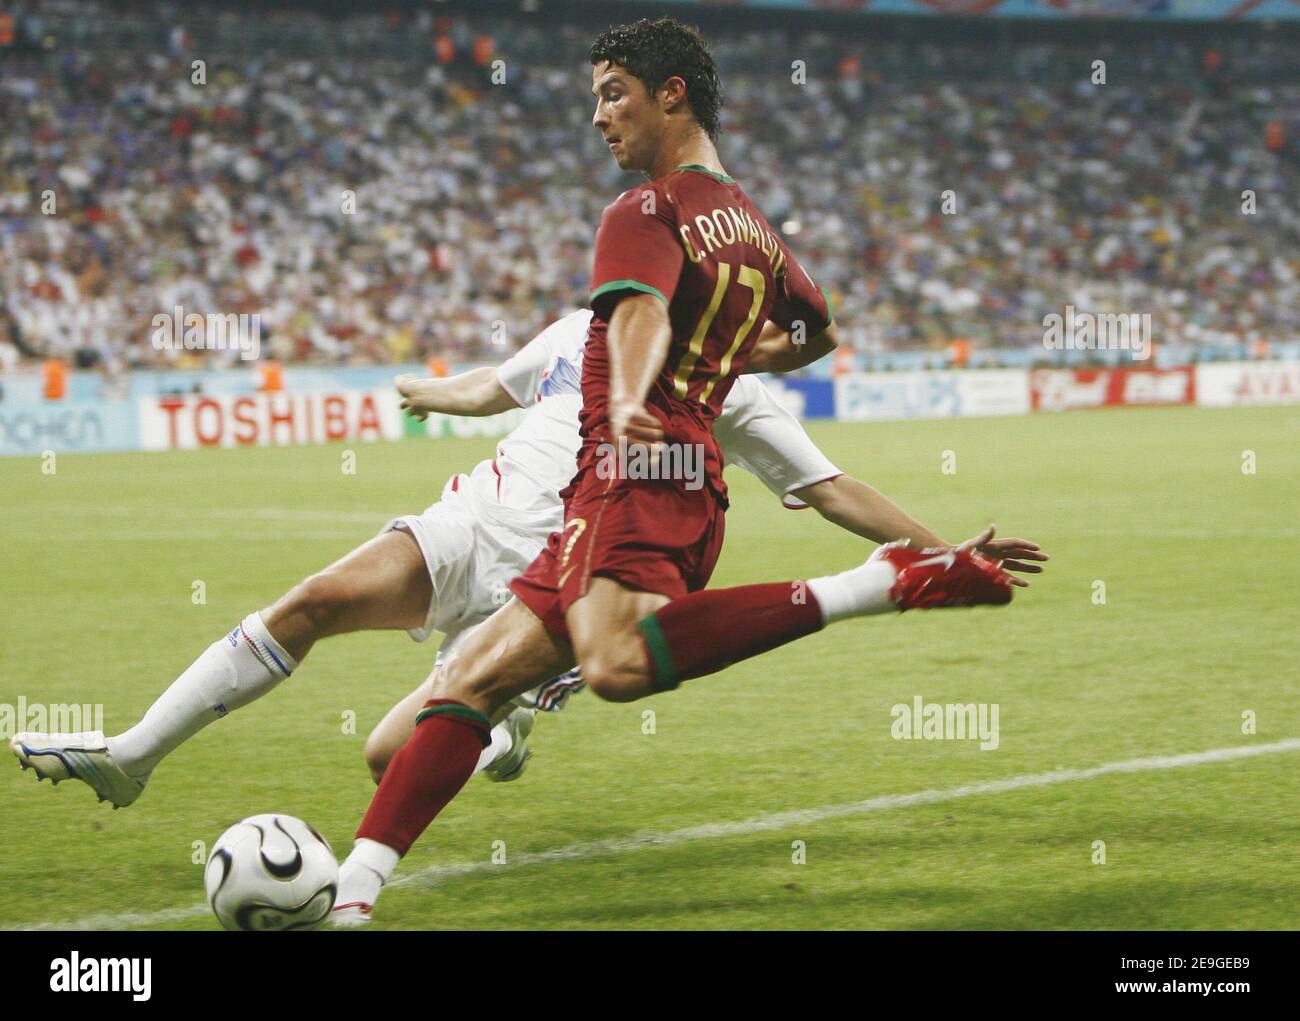 Portugal's Cristiano Ronaldo in action during the World Cup 2006, semi-final, France vs Portugal at the Allianz-Arena stadium in Munich, Germany on July 5, 2006. France won 1-0 and advanced to the final. Photo by Christian Liewig/ABACAPRESS.COM Stock Photo